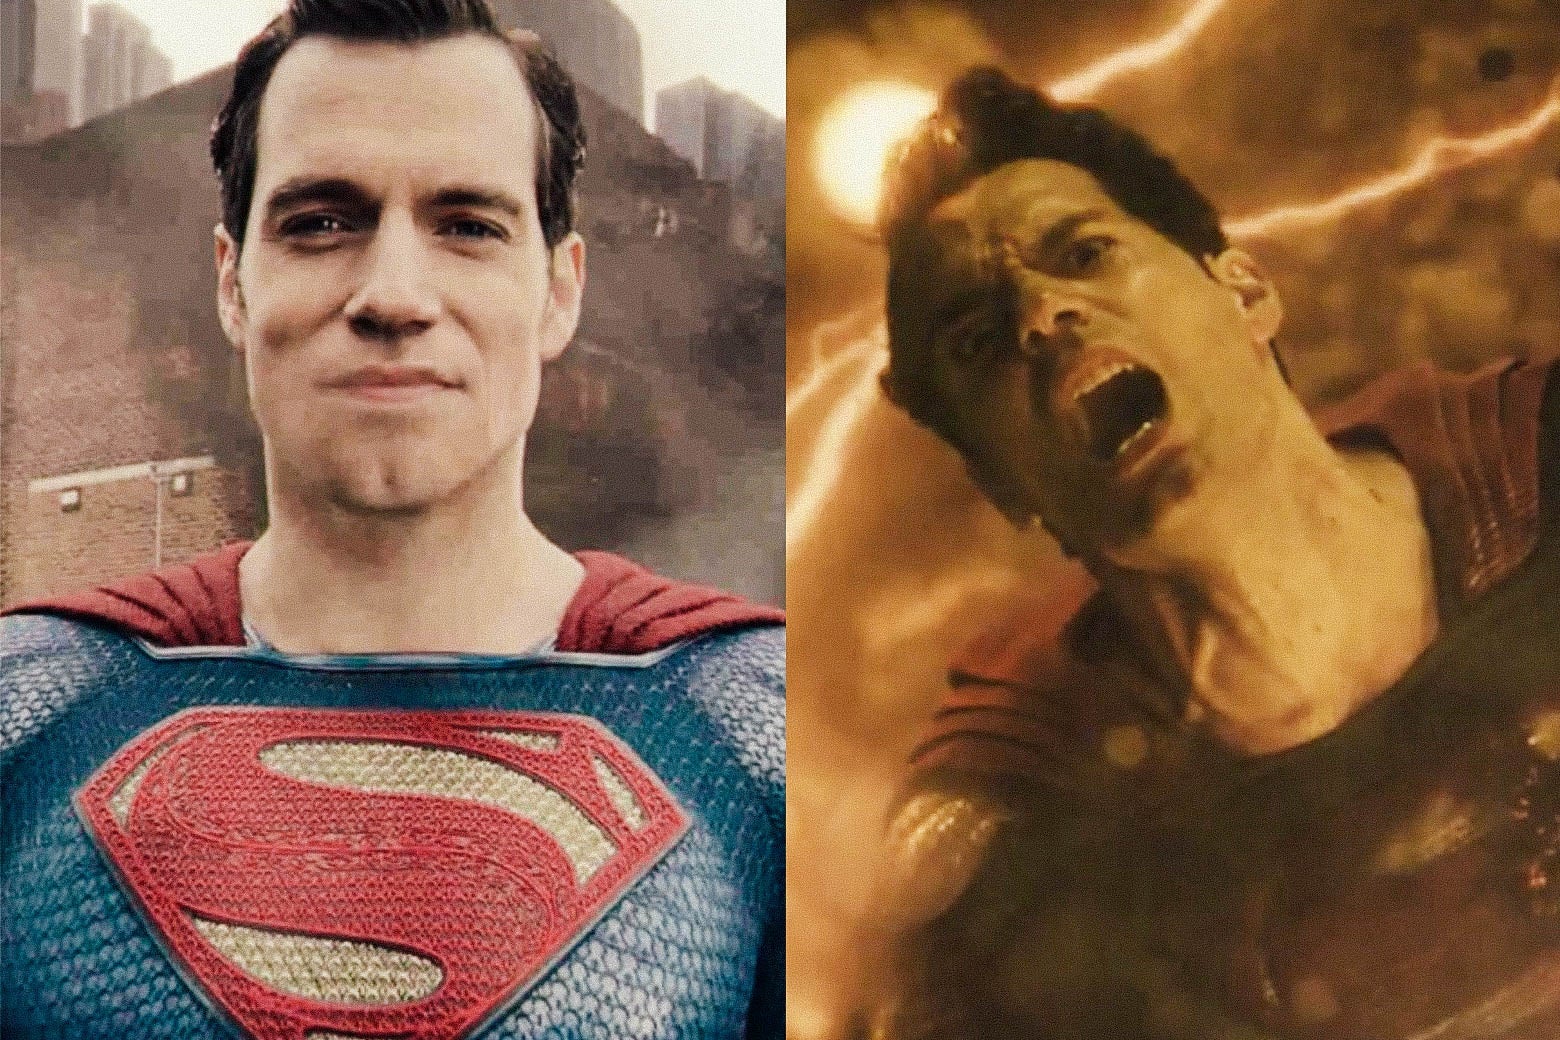 Superman in Joss Whedon’s version of the film and in Zack Snyder’s version.